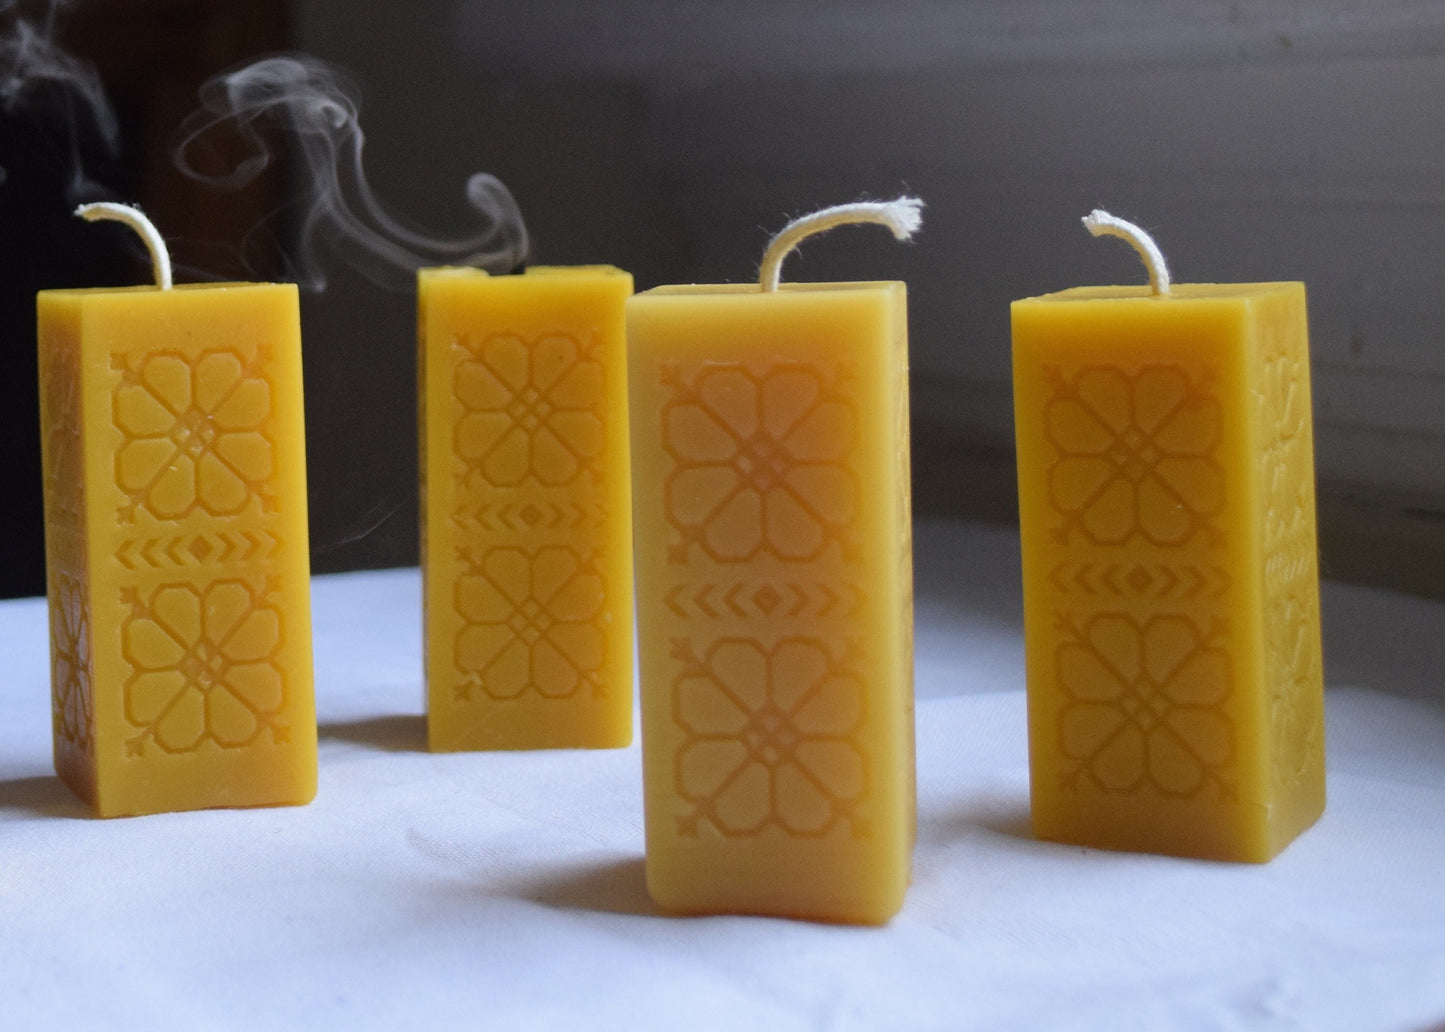 Square Sun Flower Pilllar -  Beeswax Candle // Beeswax Candle, Candle, Beeswax, Pillar Candle, Eco Friendly, Non Toxic